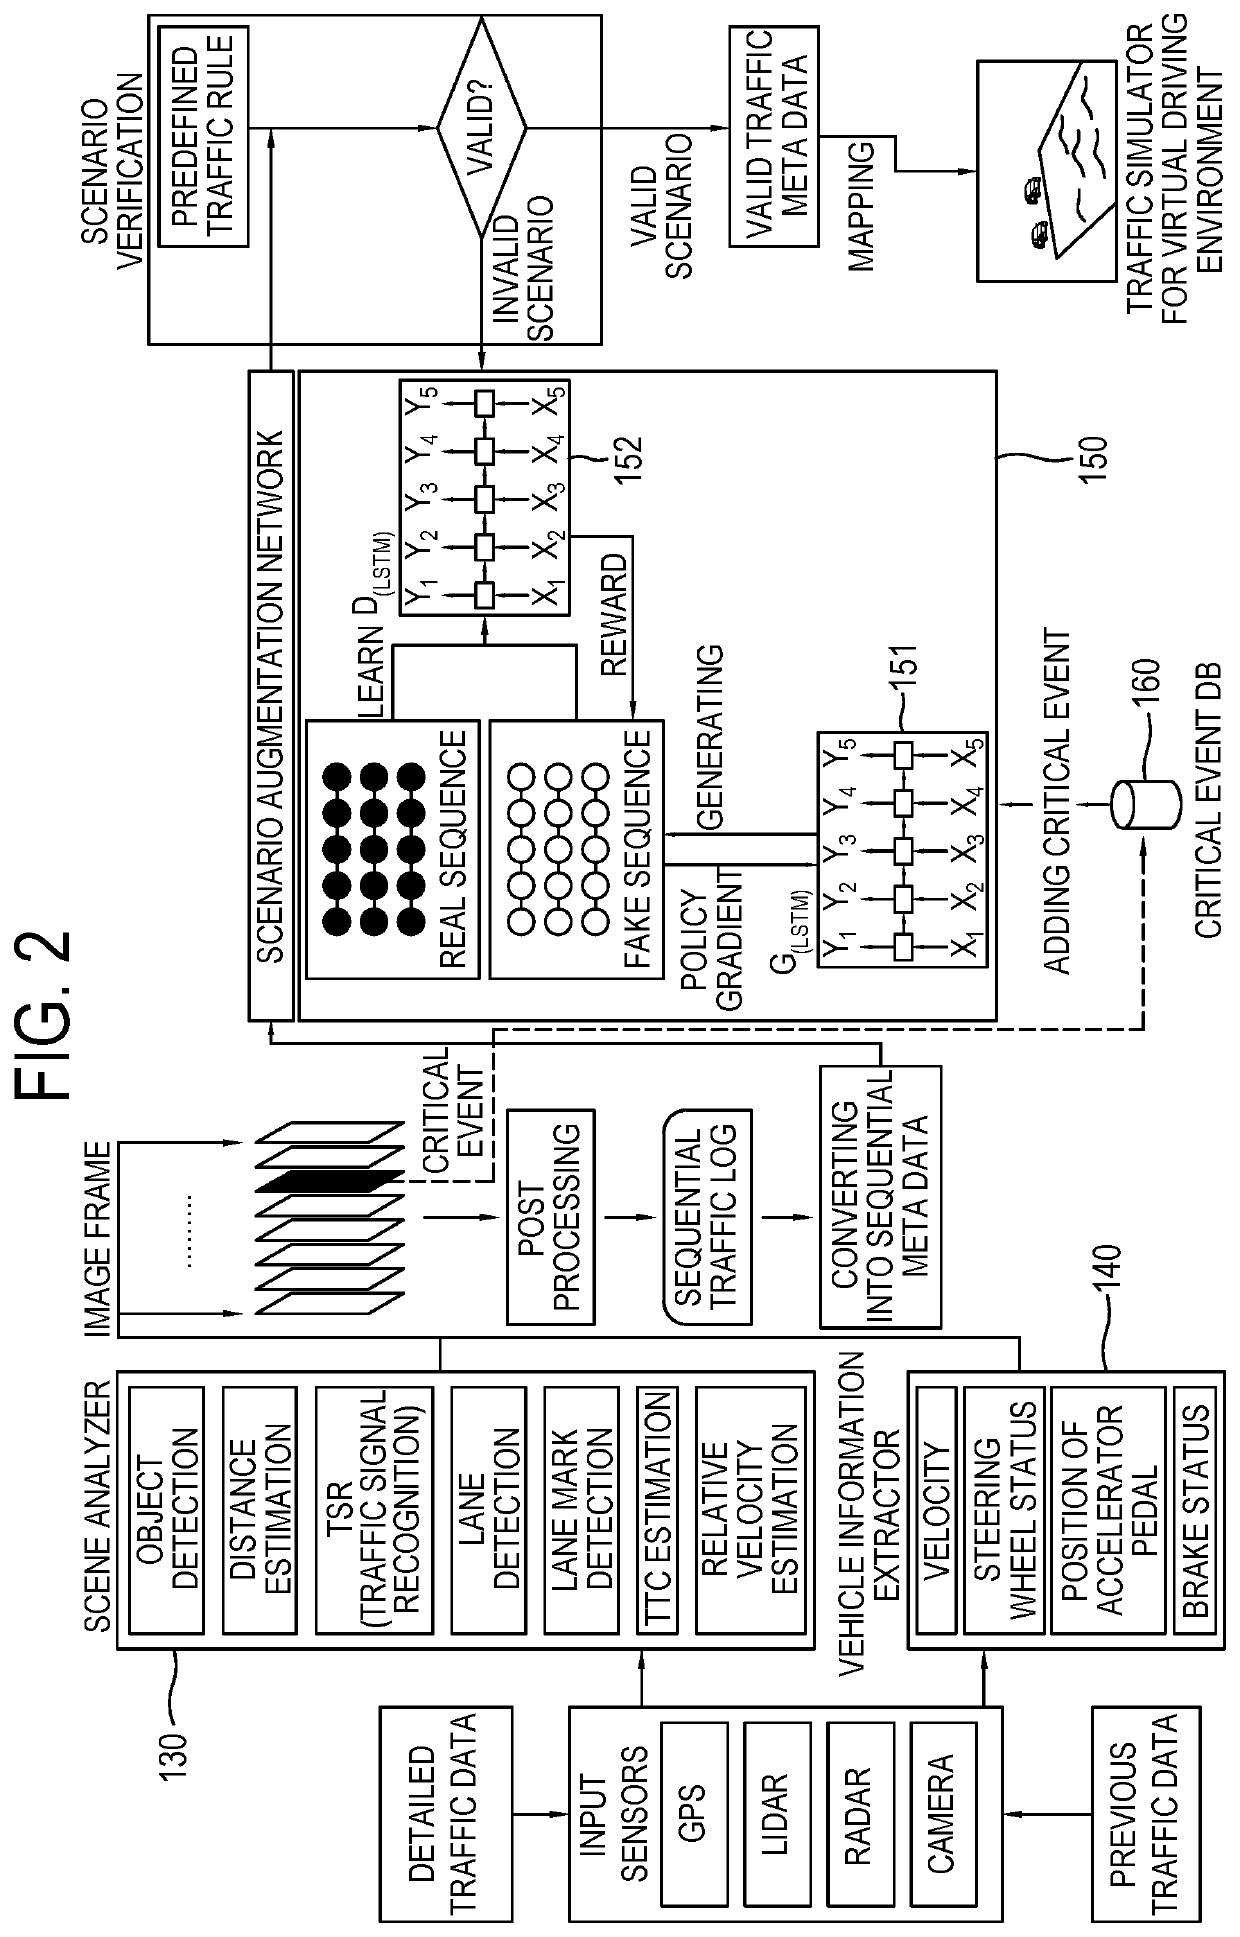 Method and device for creating traffic scenario with domain adaptation on virtual driving environment for testing, validating, and training autonomous vehicle